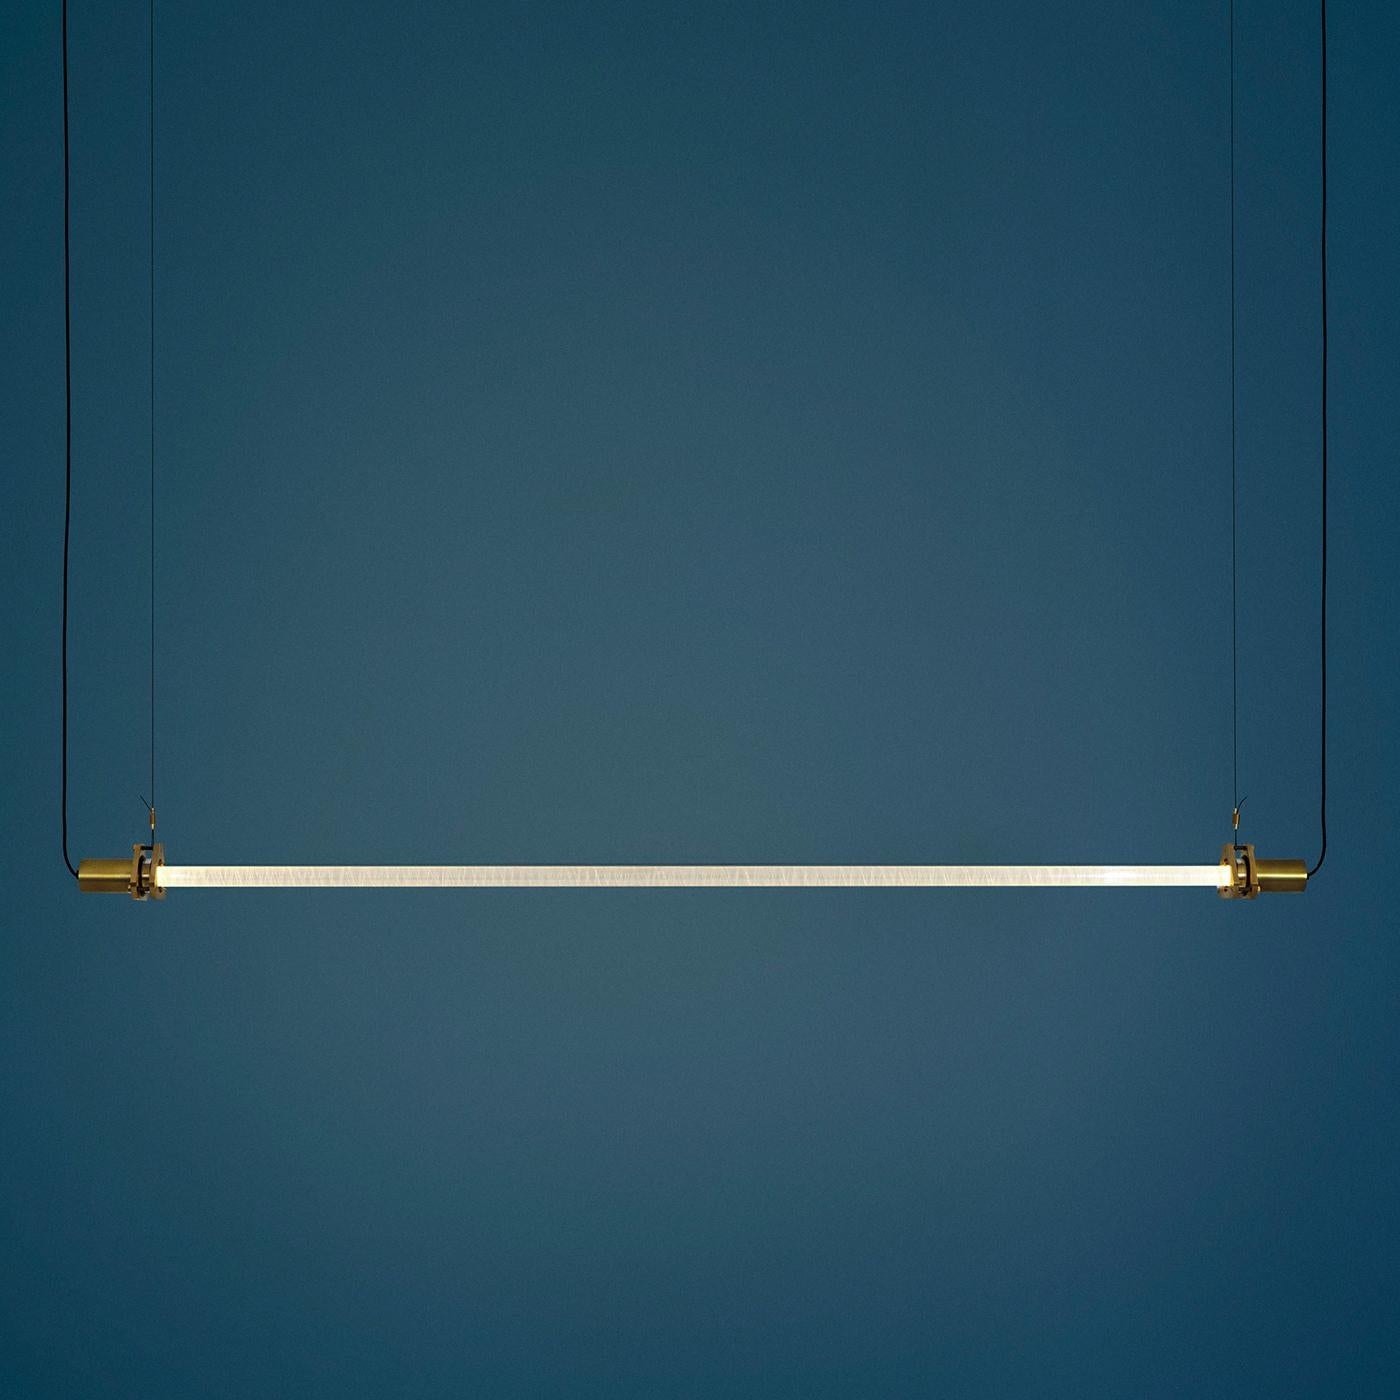 This striking suspension light exudes Industrial allure, serving as an object of strong visual impact in a modern home. A 2 meter-long borosilicate cylinder hides a curved PMMA rod wrapped in cellophane which captures, traps, and refracts a warm